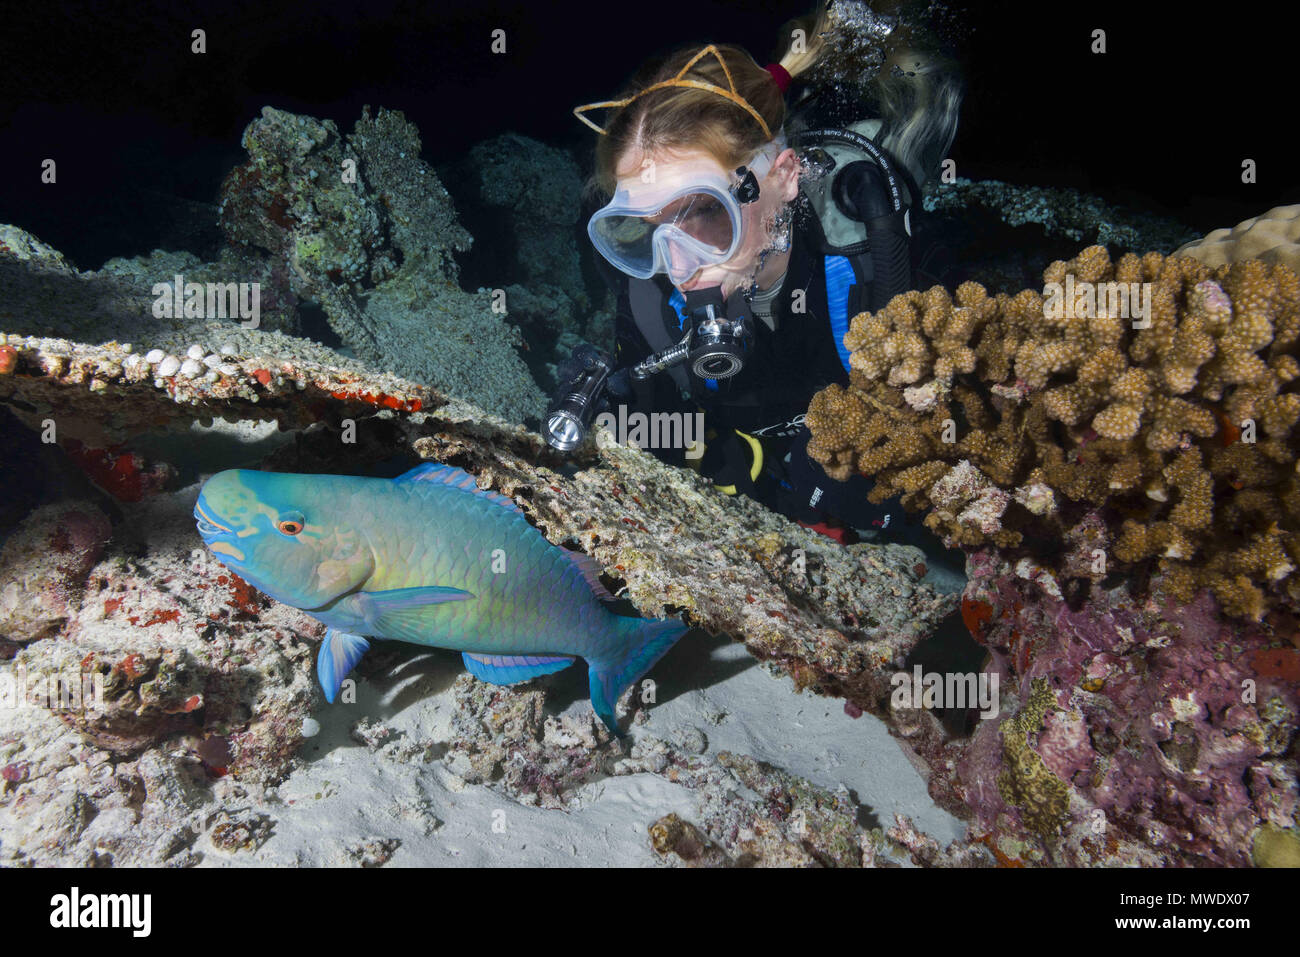 March 25, 2018 - Indian Ocean, Maldives - Female scuba diver looks at a sleeping under coral parrot at night. Bullethead Parrotfish, daisy parrotfish or bullethead parrotfish  (Credit Image: © Andrey Nekrasov/ZUMA Wire/ZUMAPRESS.com) Stock Photo